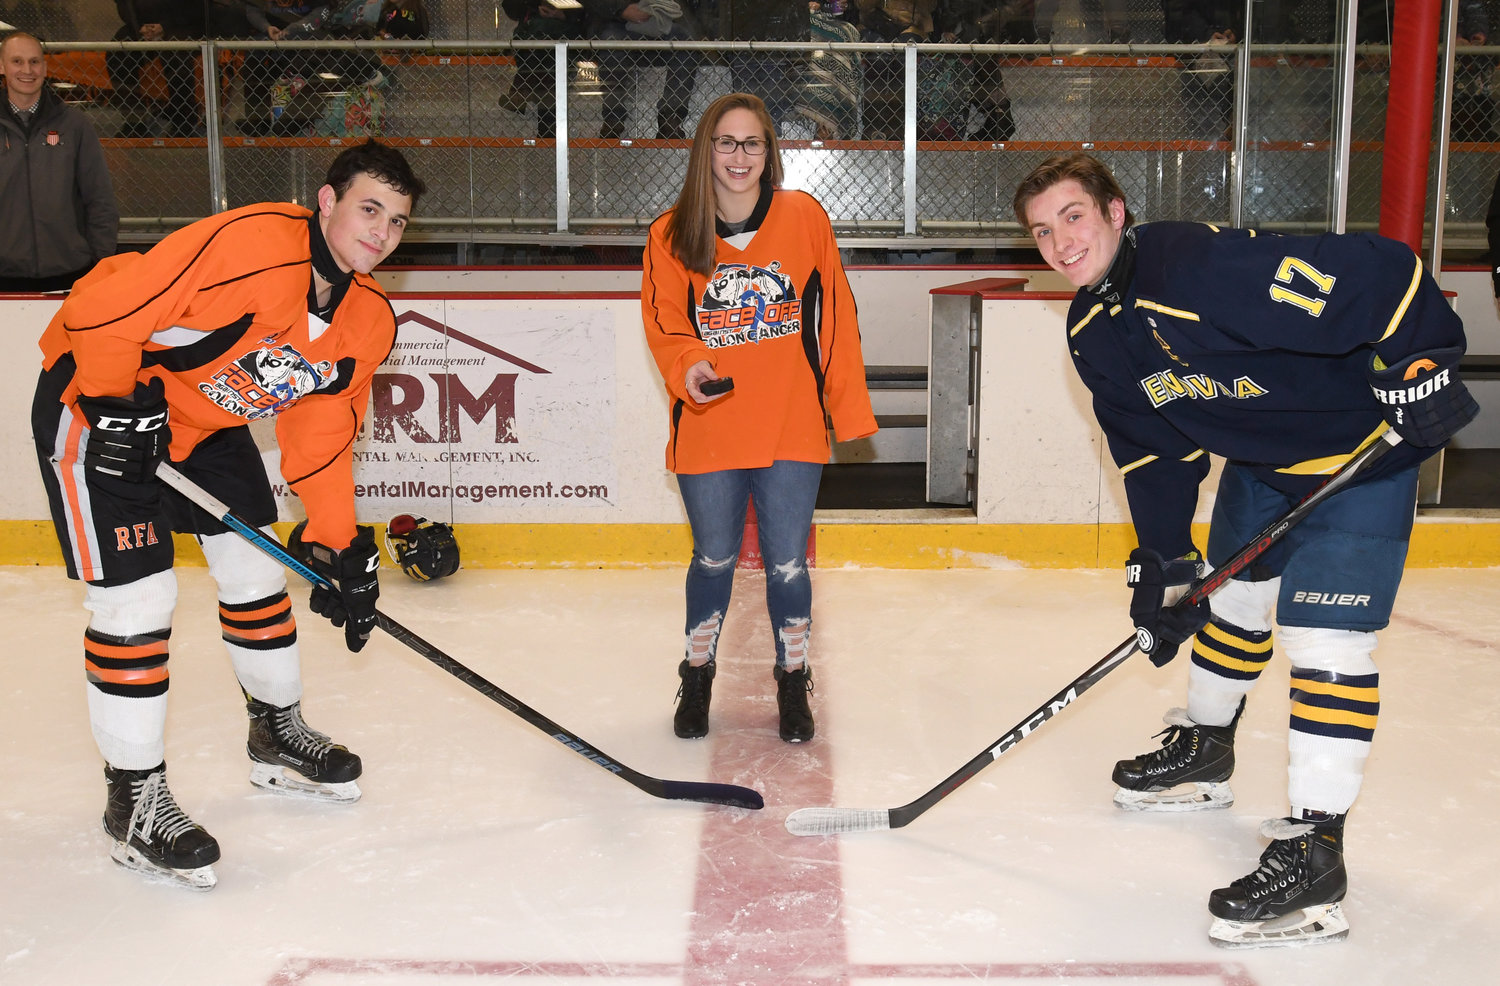 FACE OFF — The ceremonial puck drop at Friday night's Face Off Against Colon Cancer benefit game at Kennedy Arena was made by Kaitlyn Mastracco, daughter of former Rome Free Academy coach and player Peter Mastracco, who died of colon cancer. At left is RFA captain Danny Mecca and at right is Cazenovia captain Dominic Paglia. Over $1,000 was raised during the game.